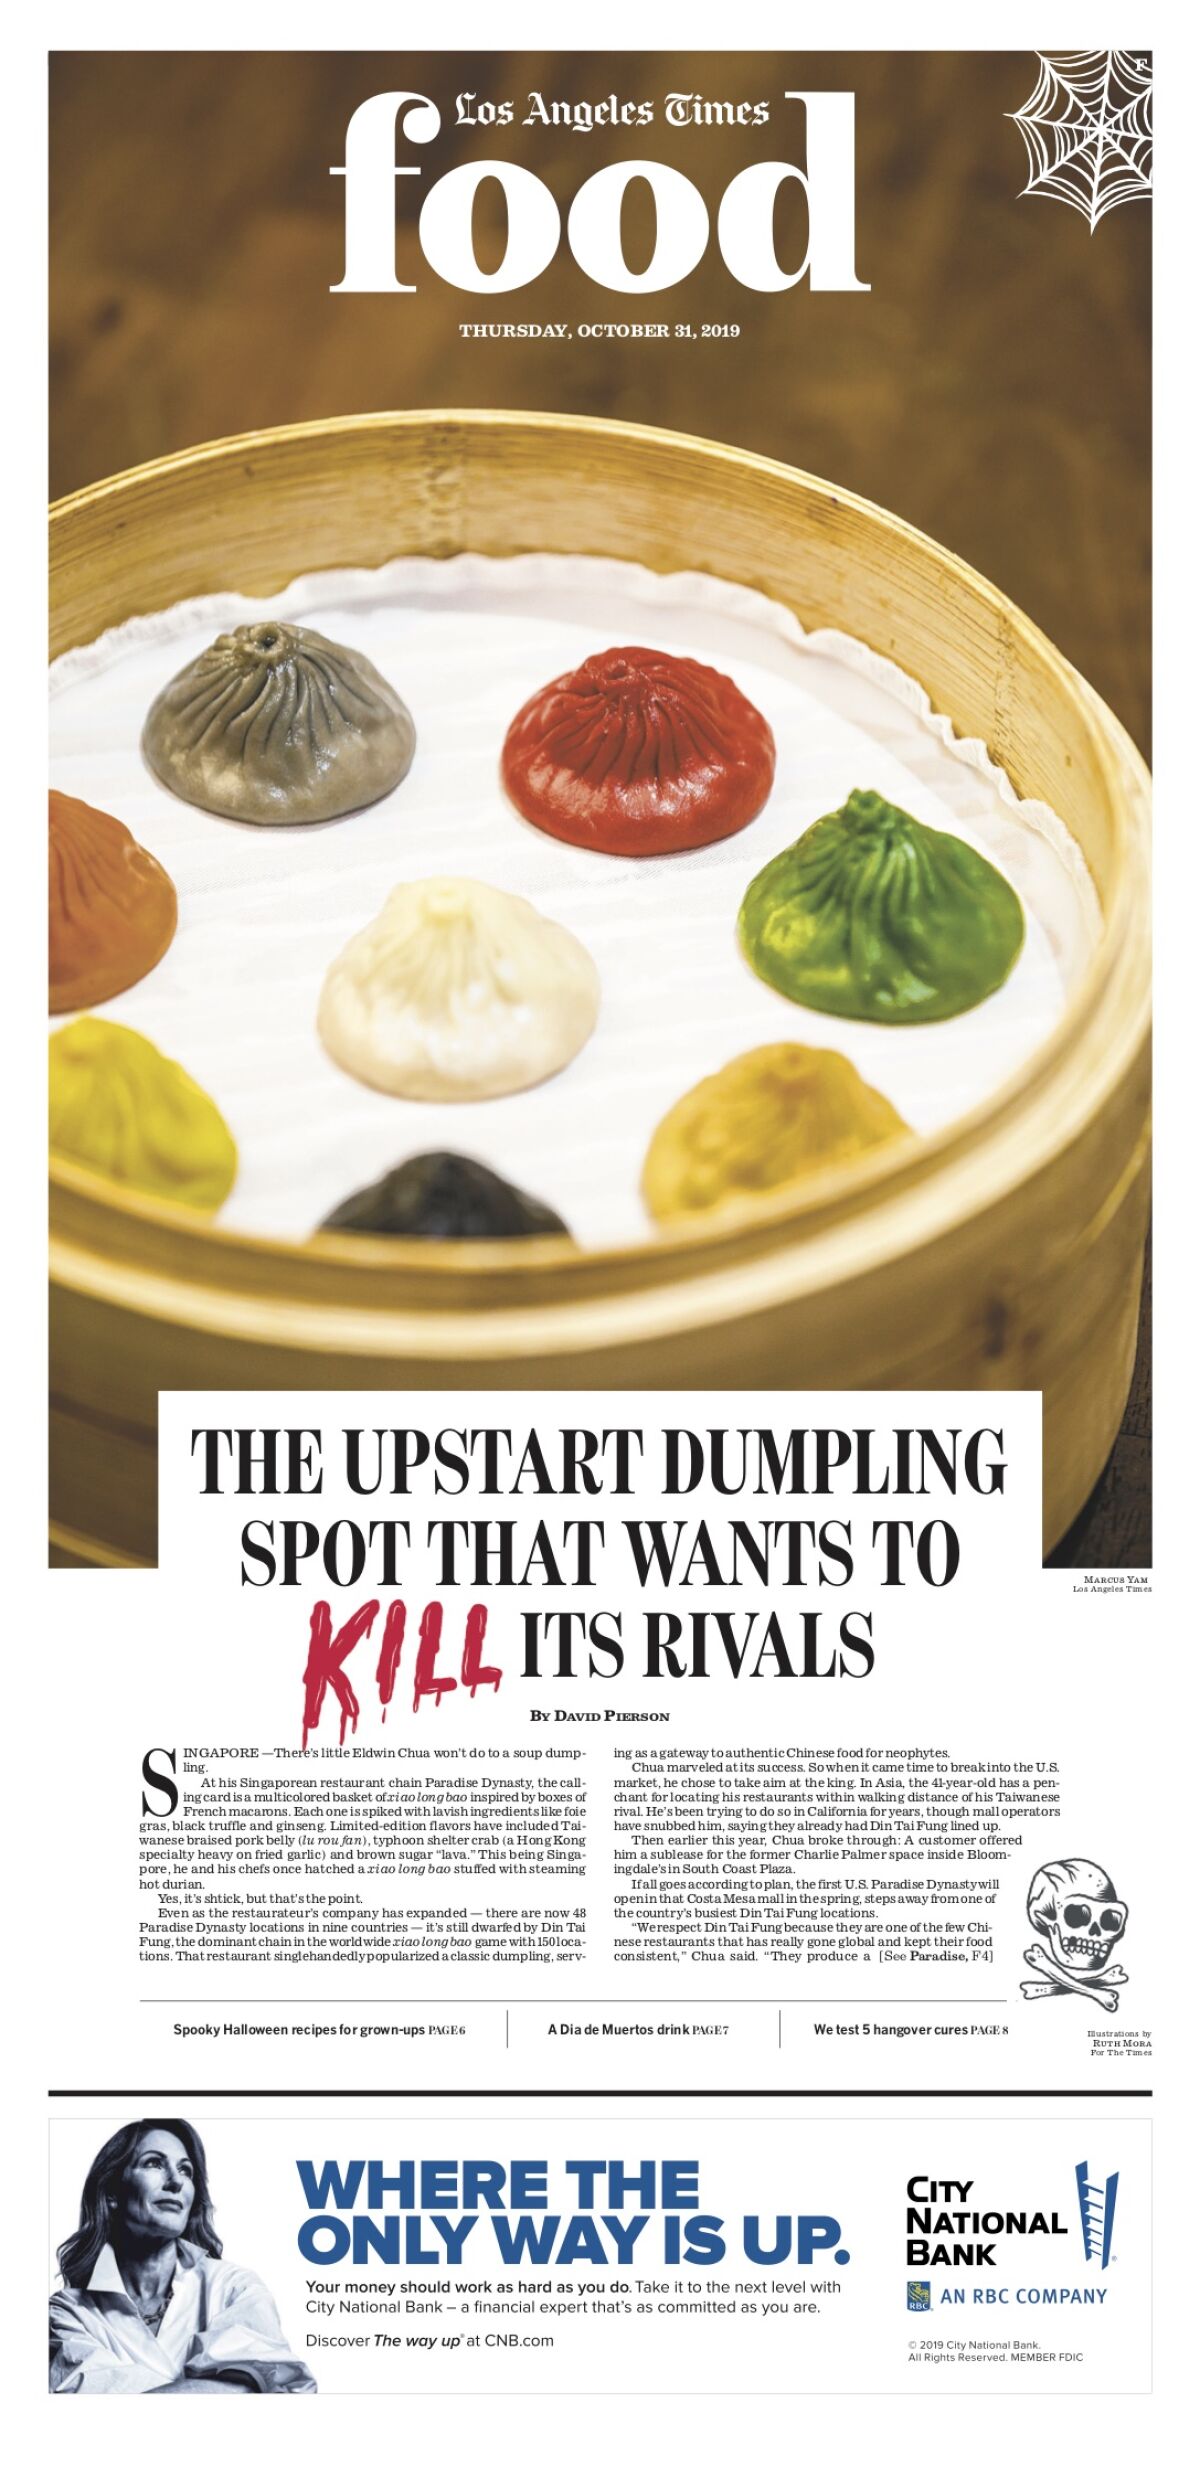 Los Angeles Times Food cover, October 31, 2019 